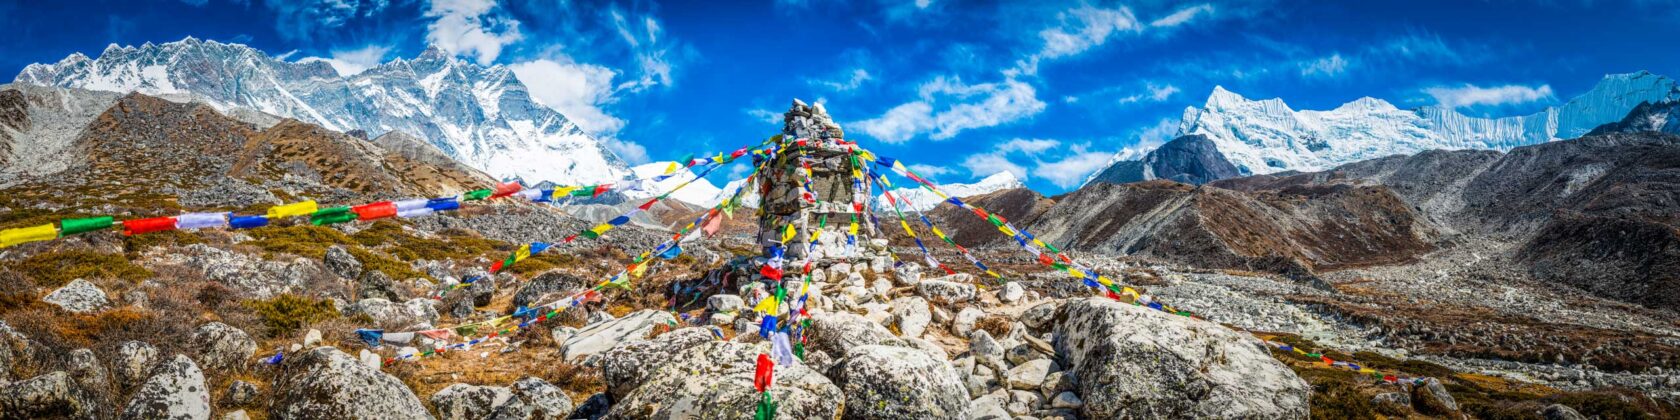 Buddhist prayer flags fluttering in the thin air of the Everest Base Camp trail.